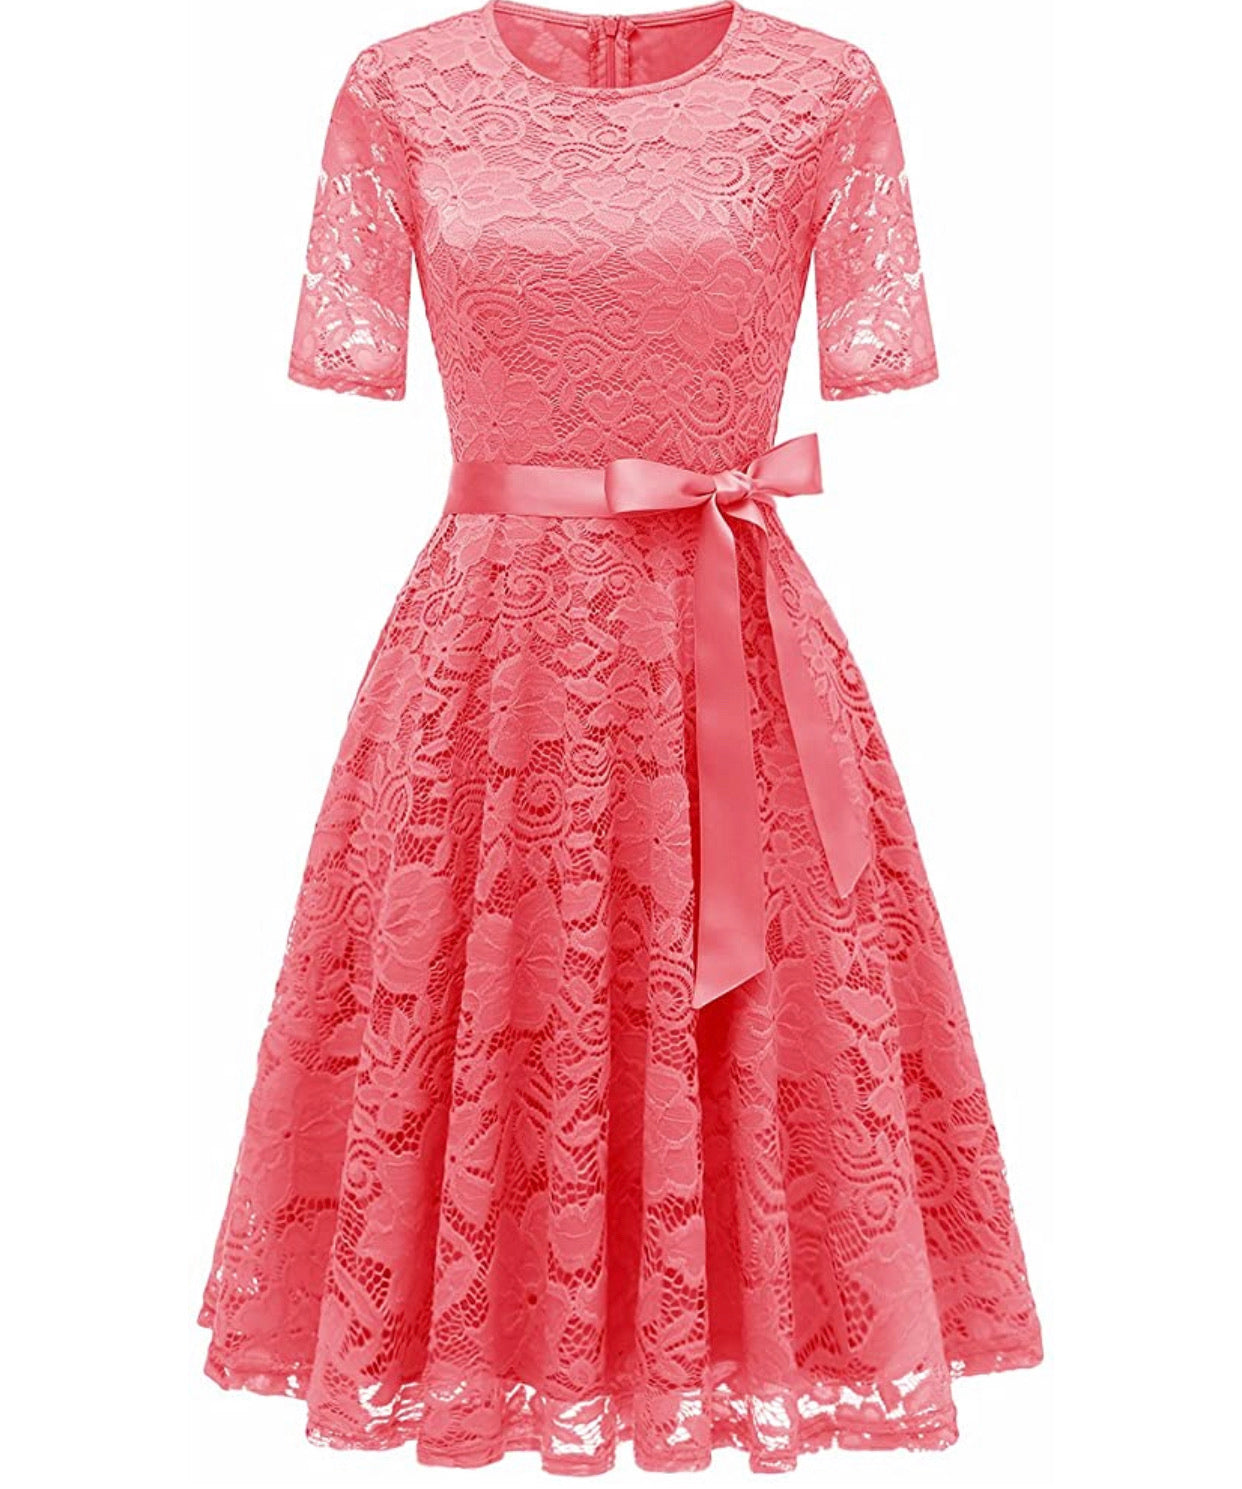 Vintage Inspired Full Lace Cocktail Dress, Sizes Small - 3XLarge (Coral)